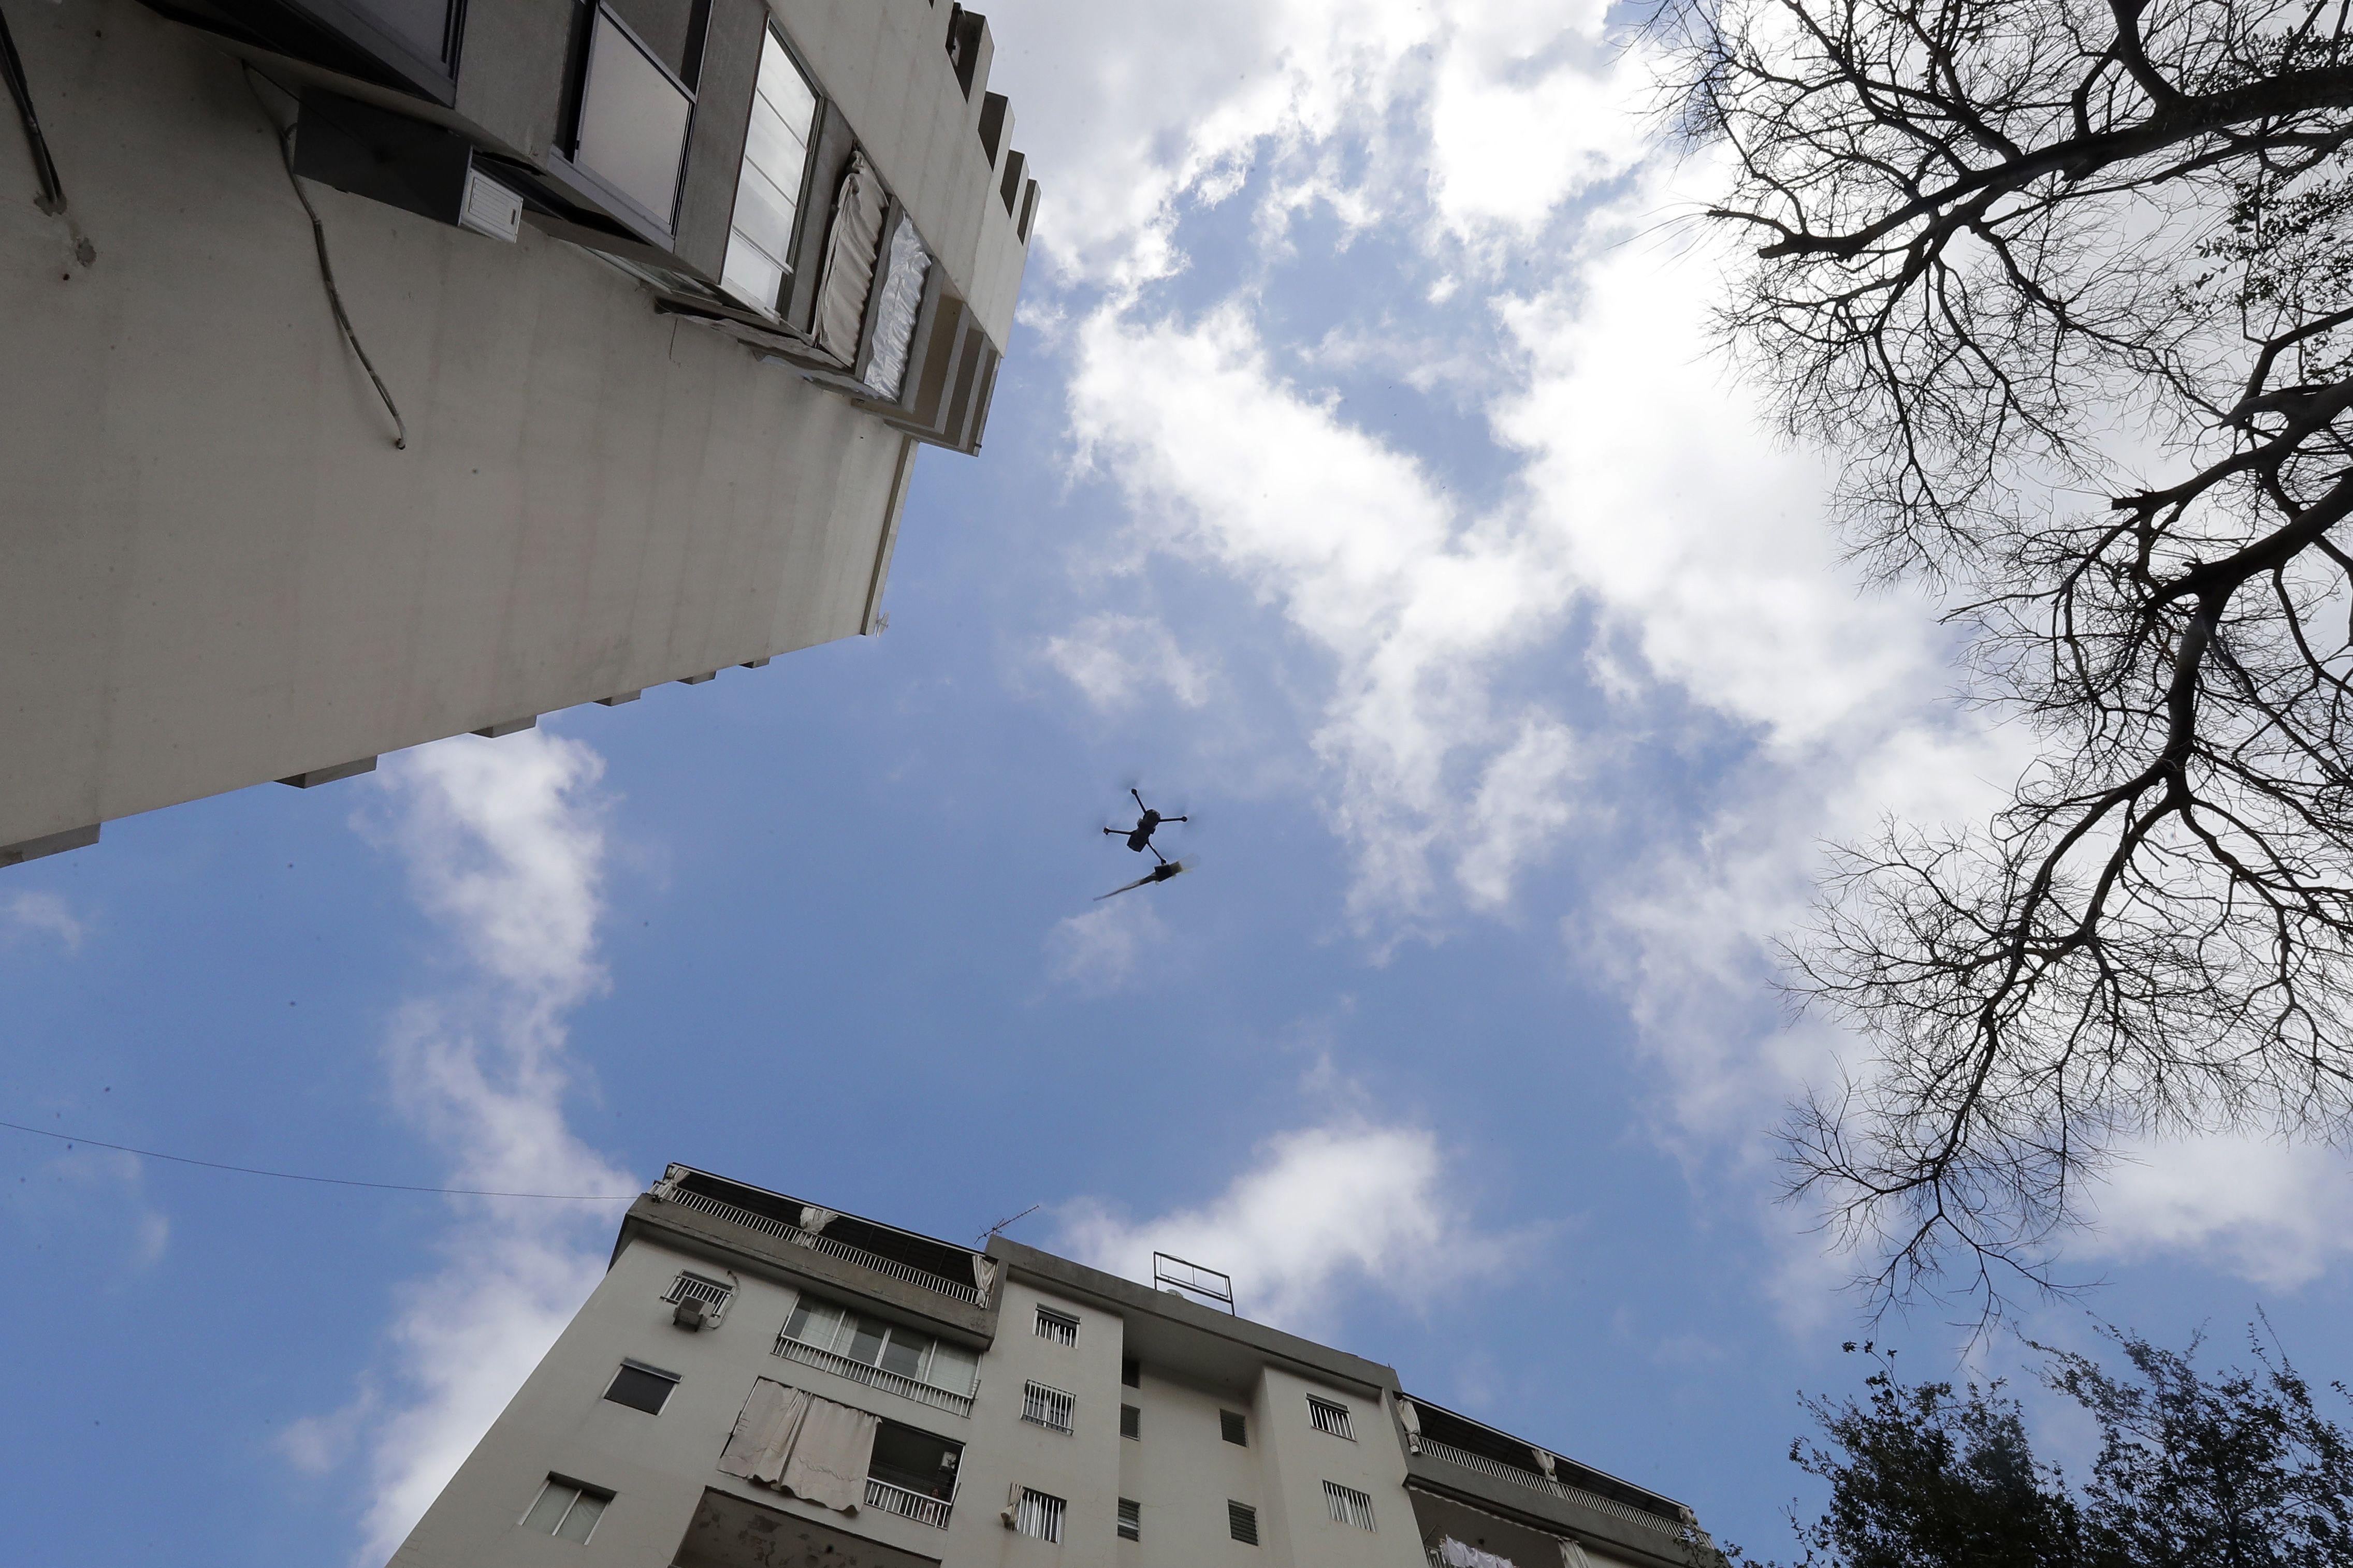 Low-angle shot of a drone flying between tall buildings toward a balcony. There is a rose attached to the drone.